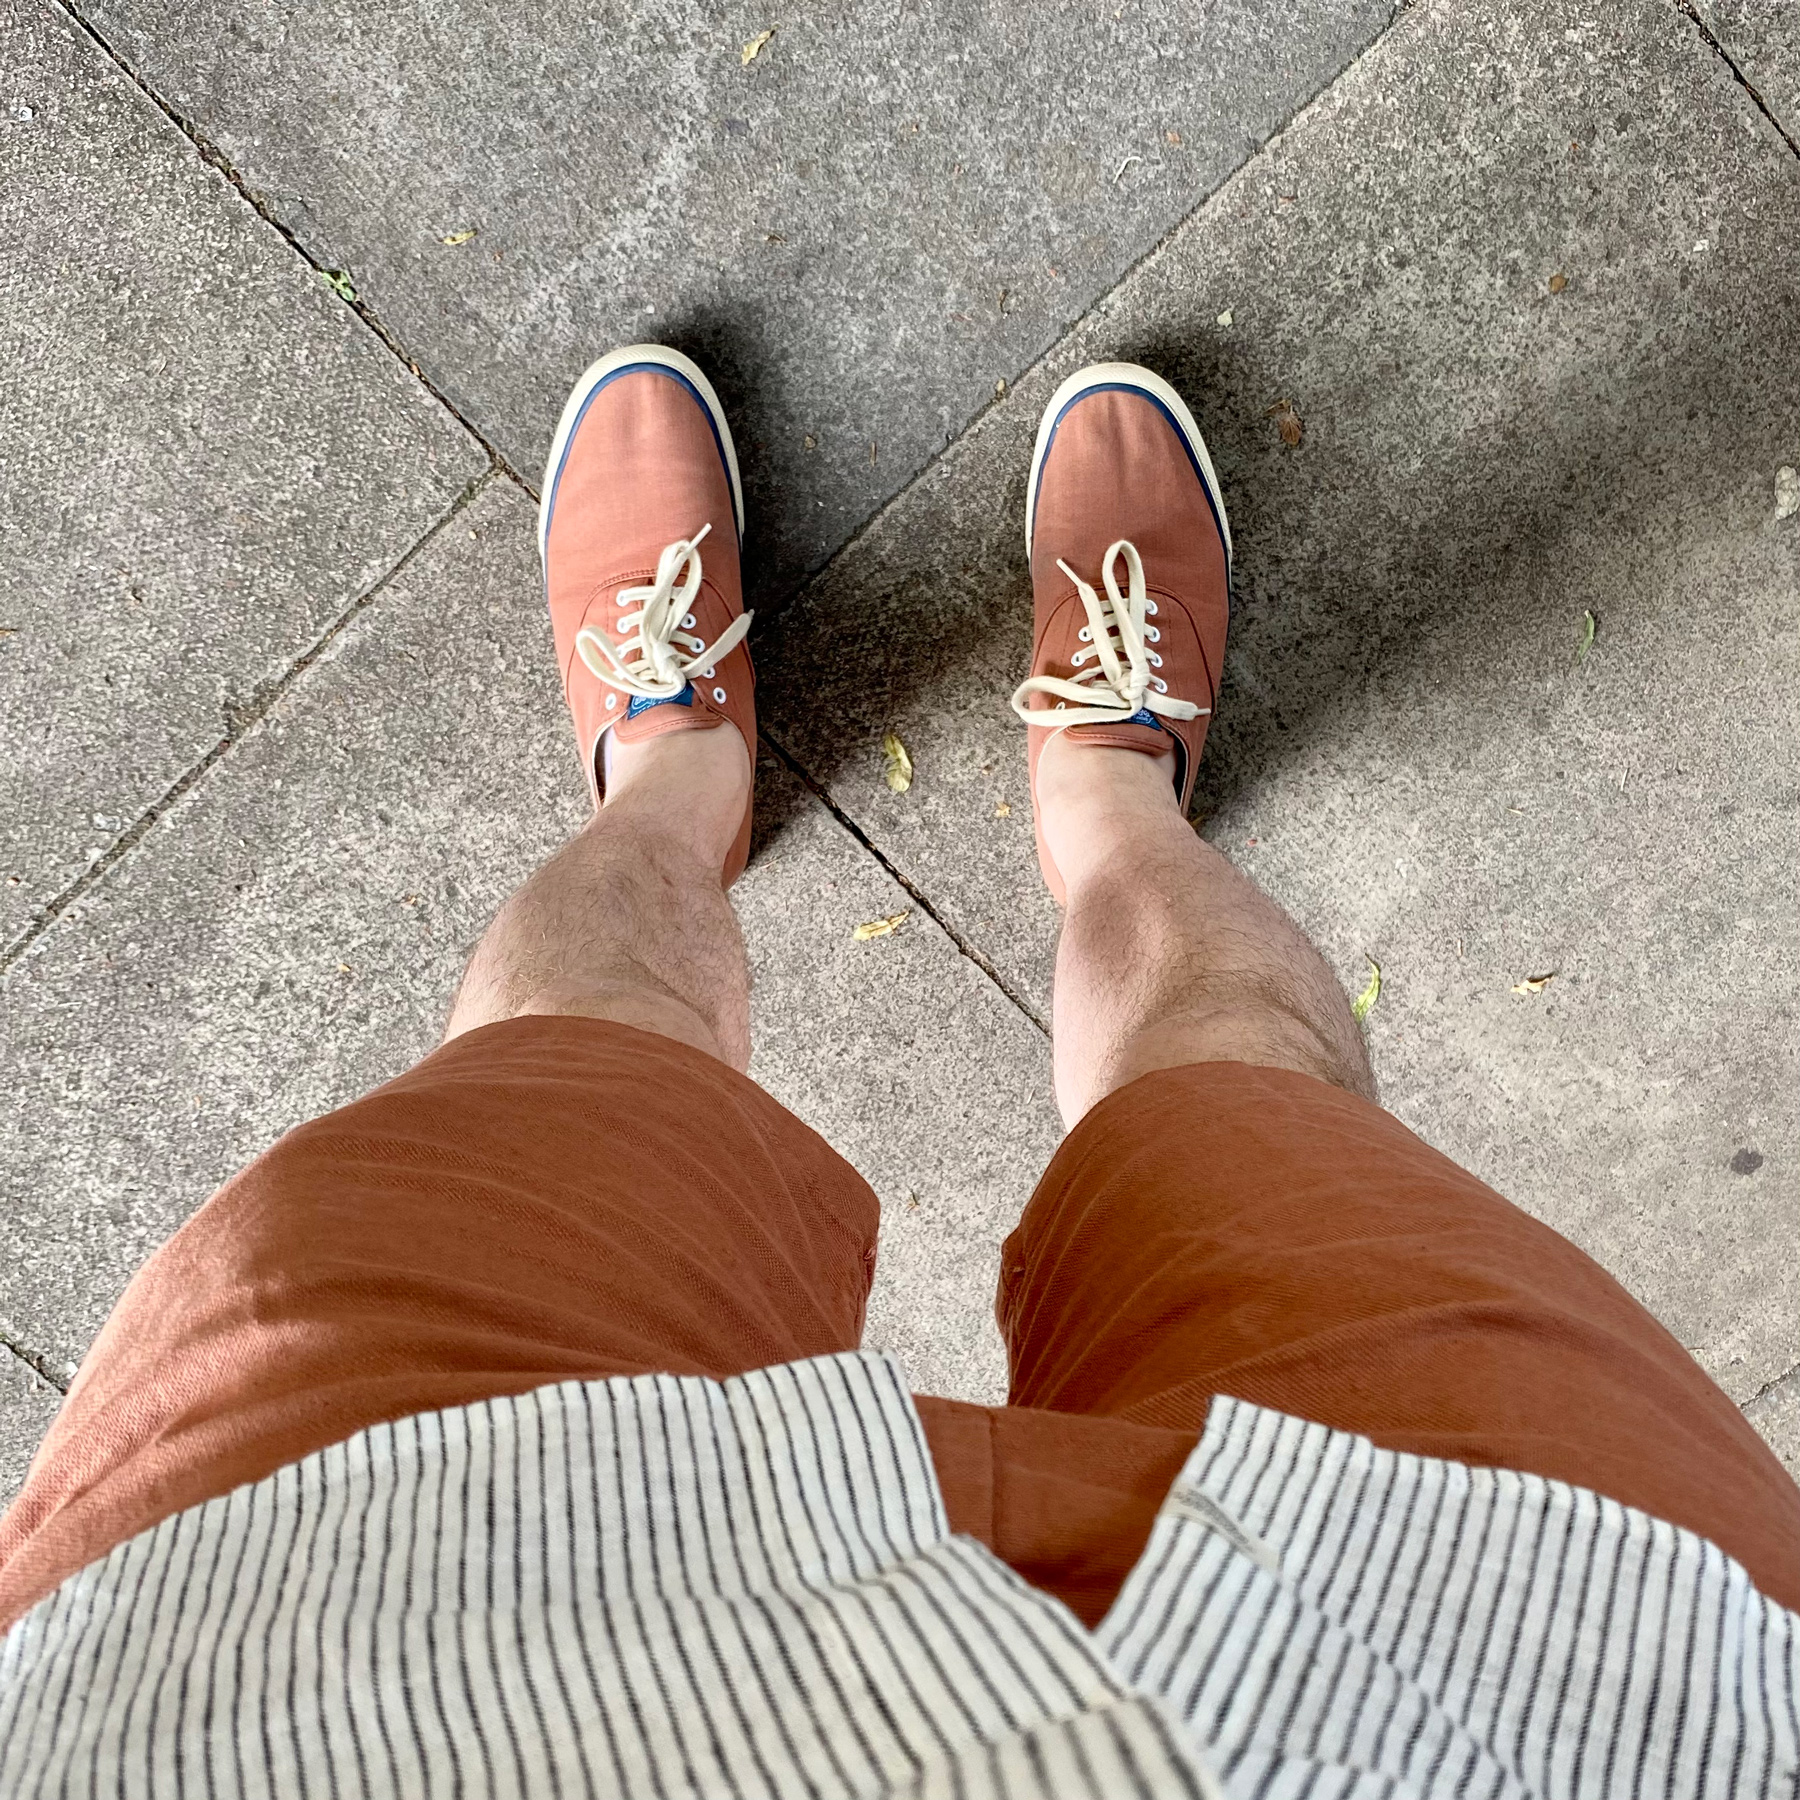 My matching shorts and shoes